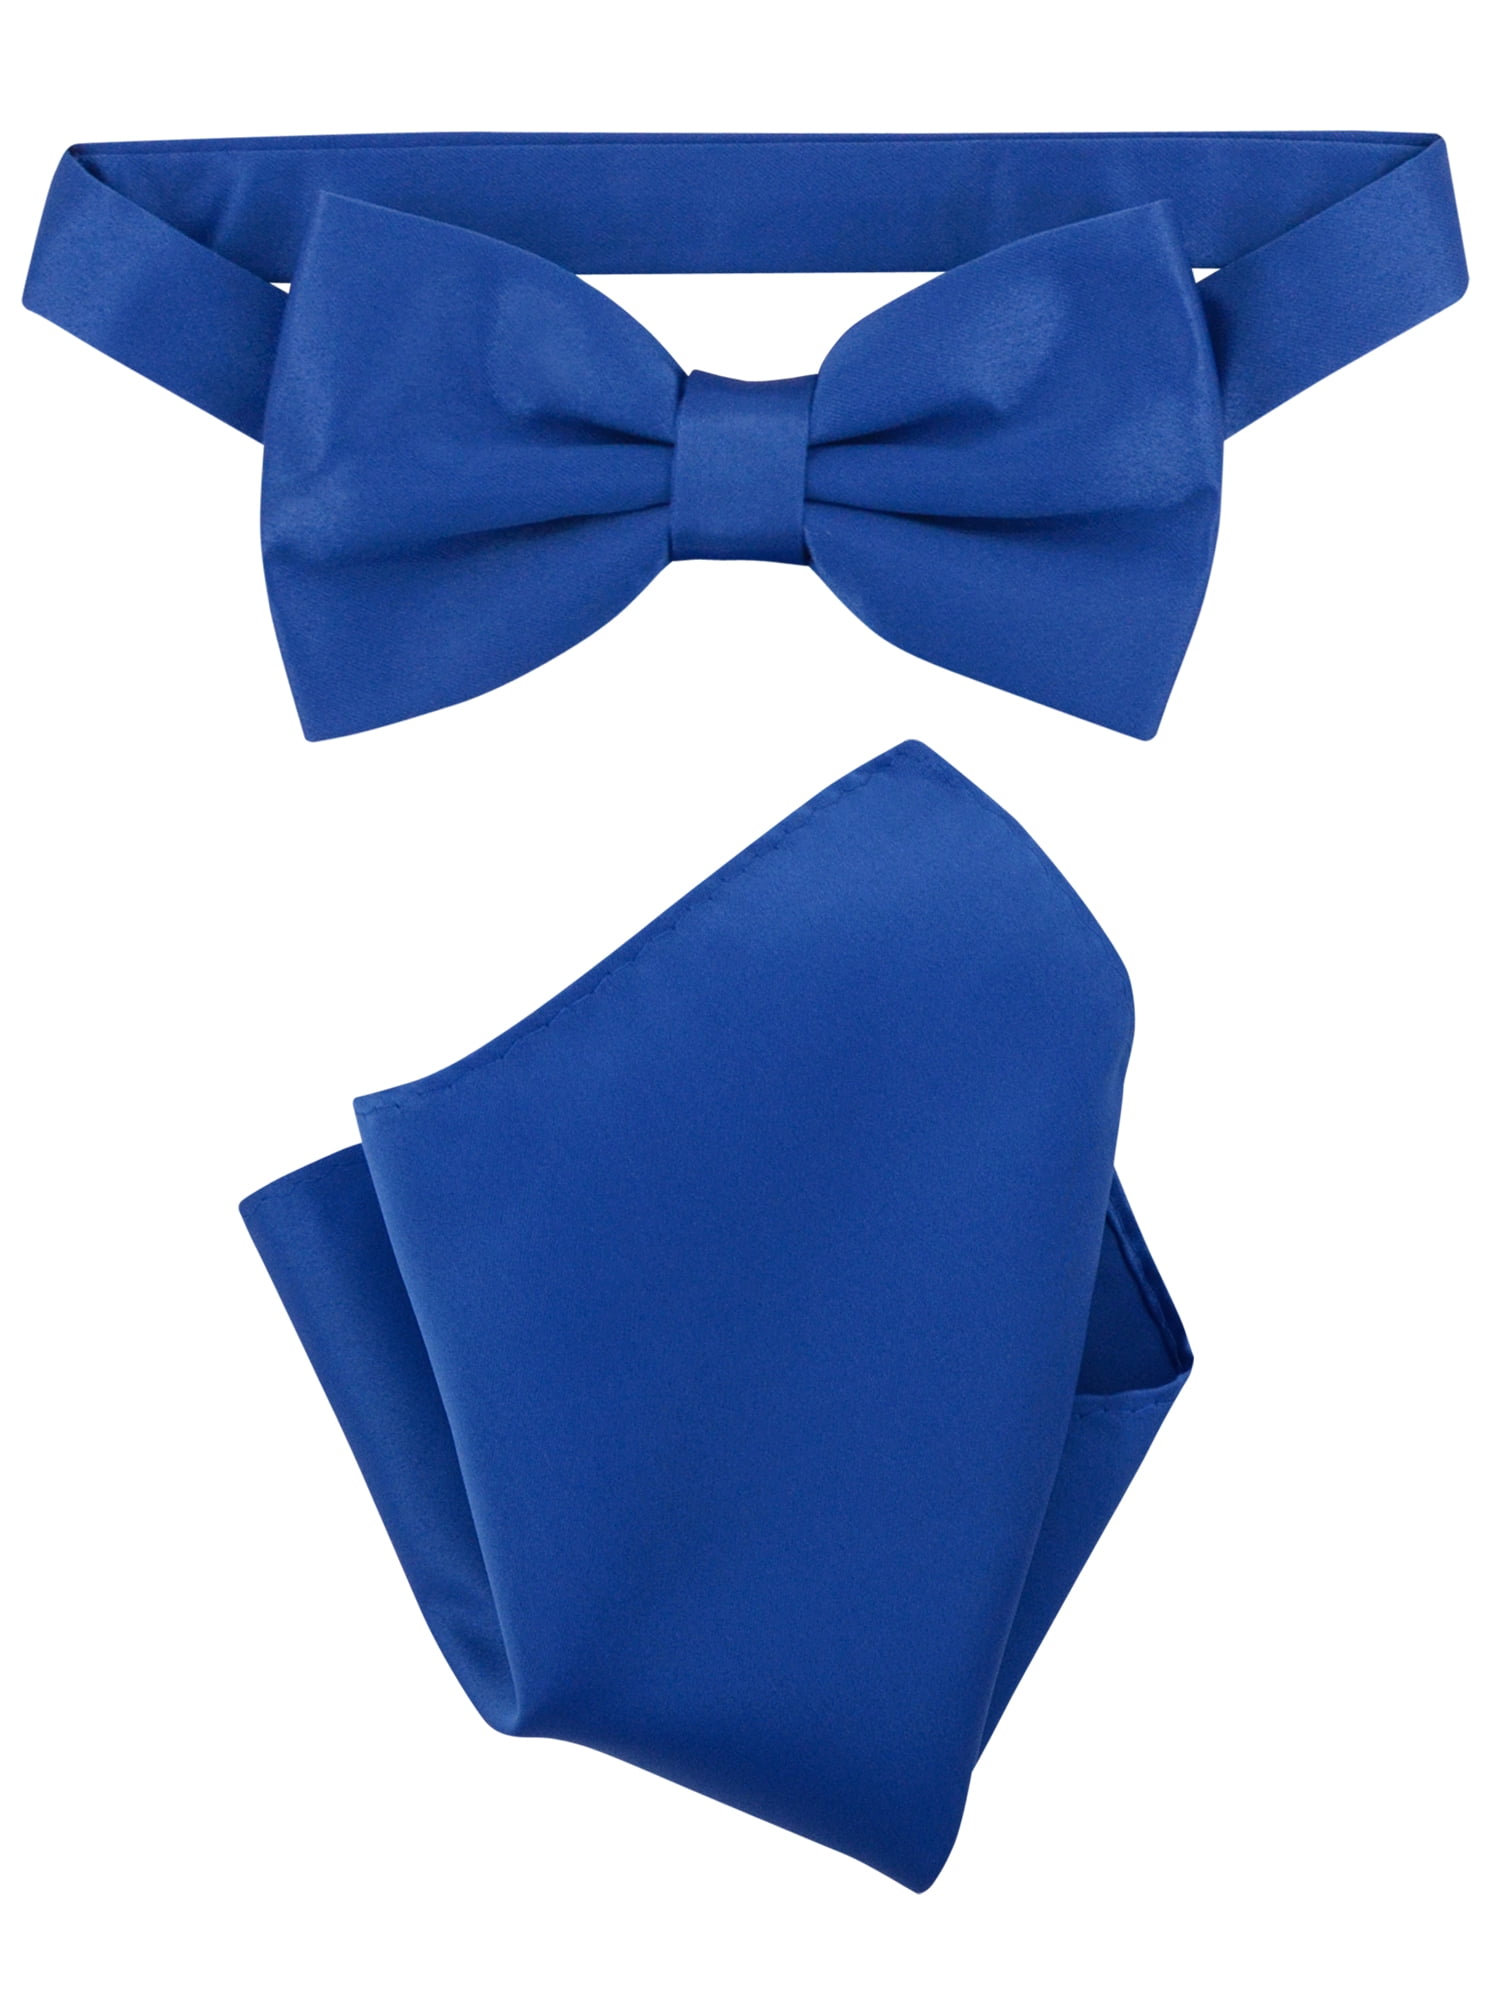 New Tuxedo PreTied Royal Blue Bow Tie Satin Matching Adjustable Band  US SELLER 